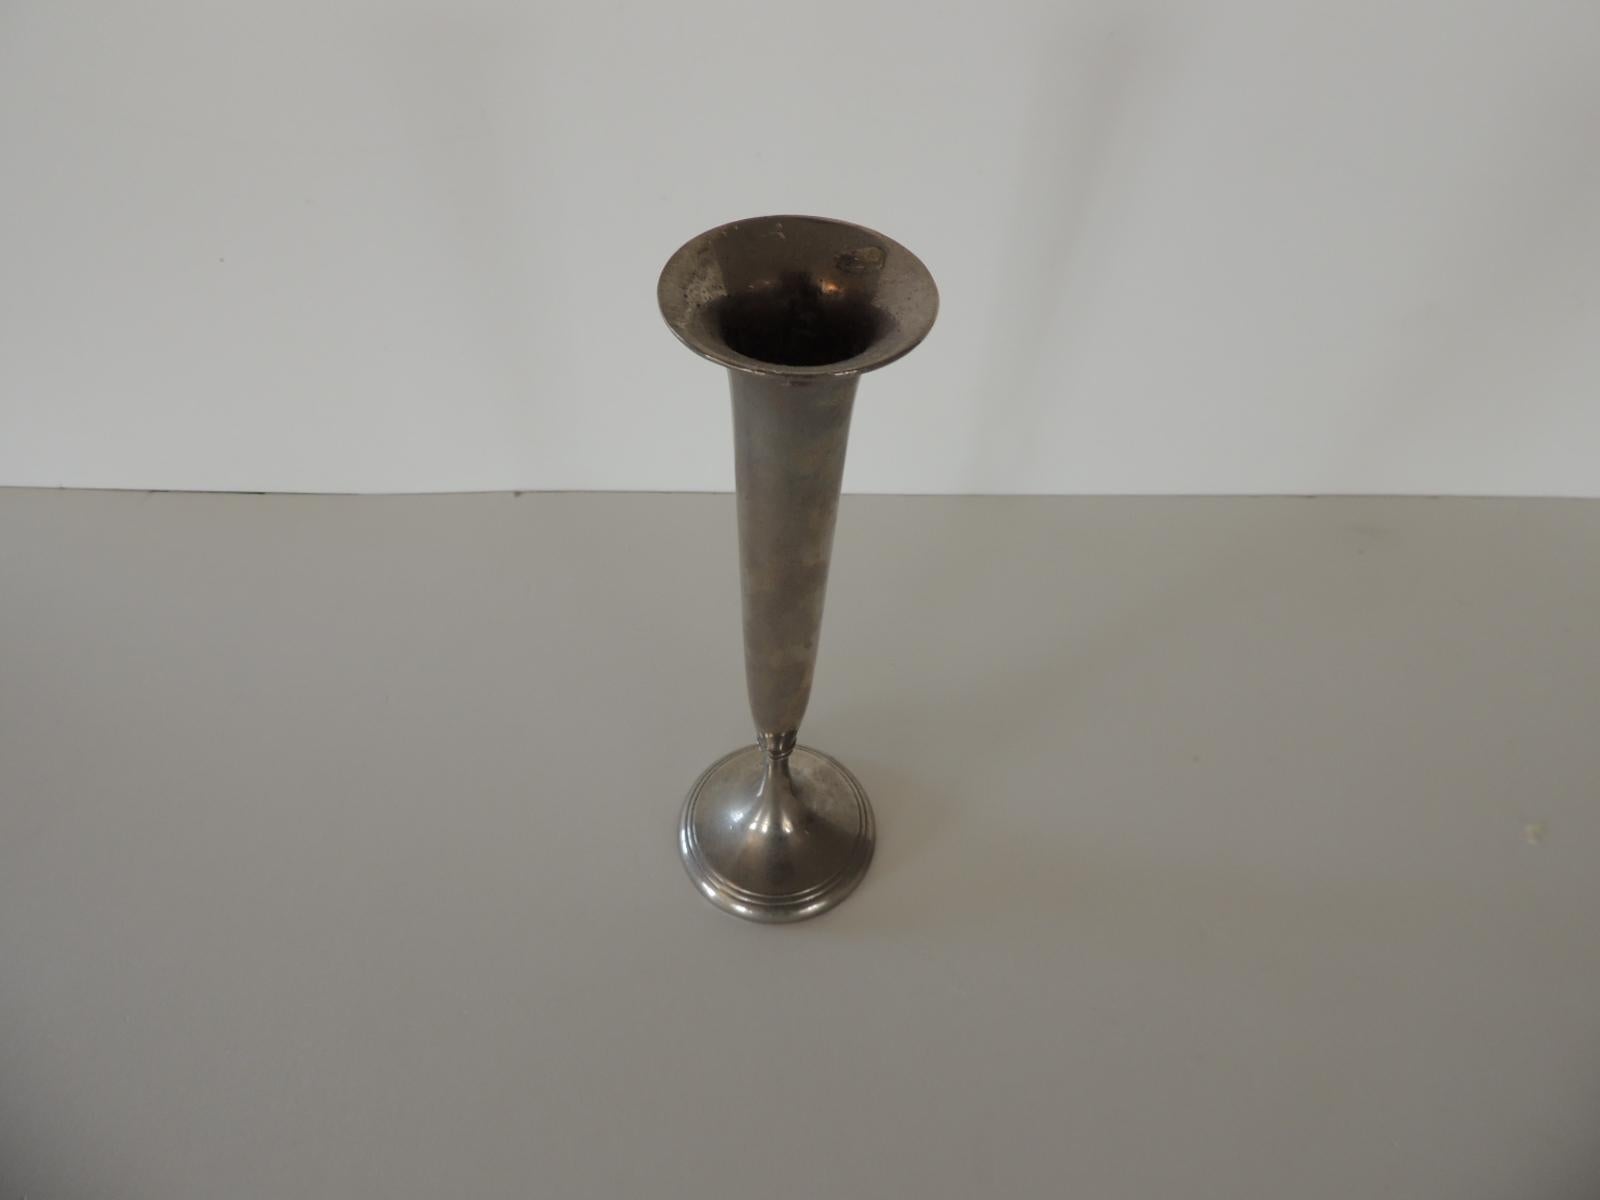 Silver plated small bud vase.
Size: 2